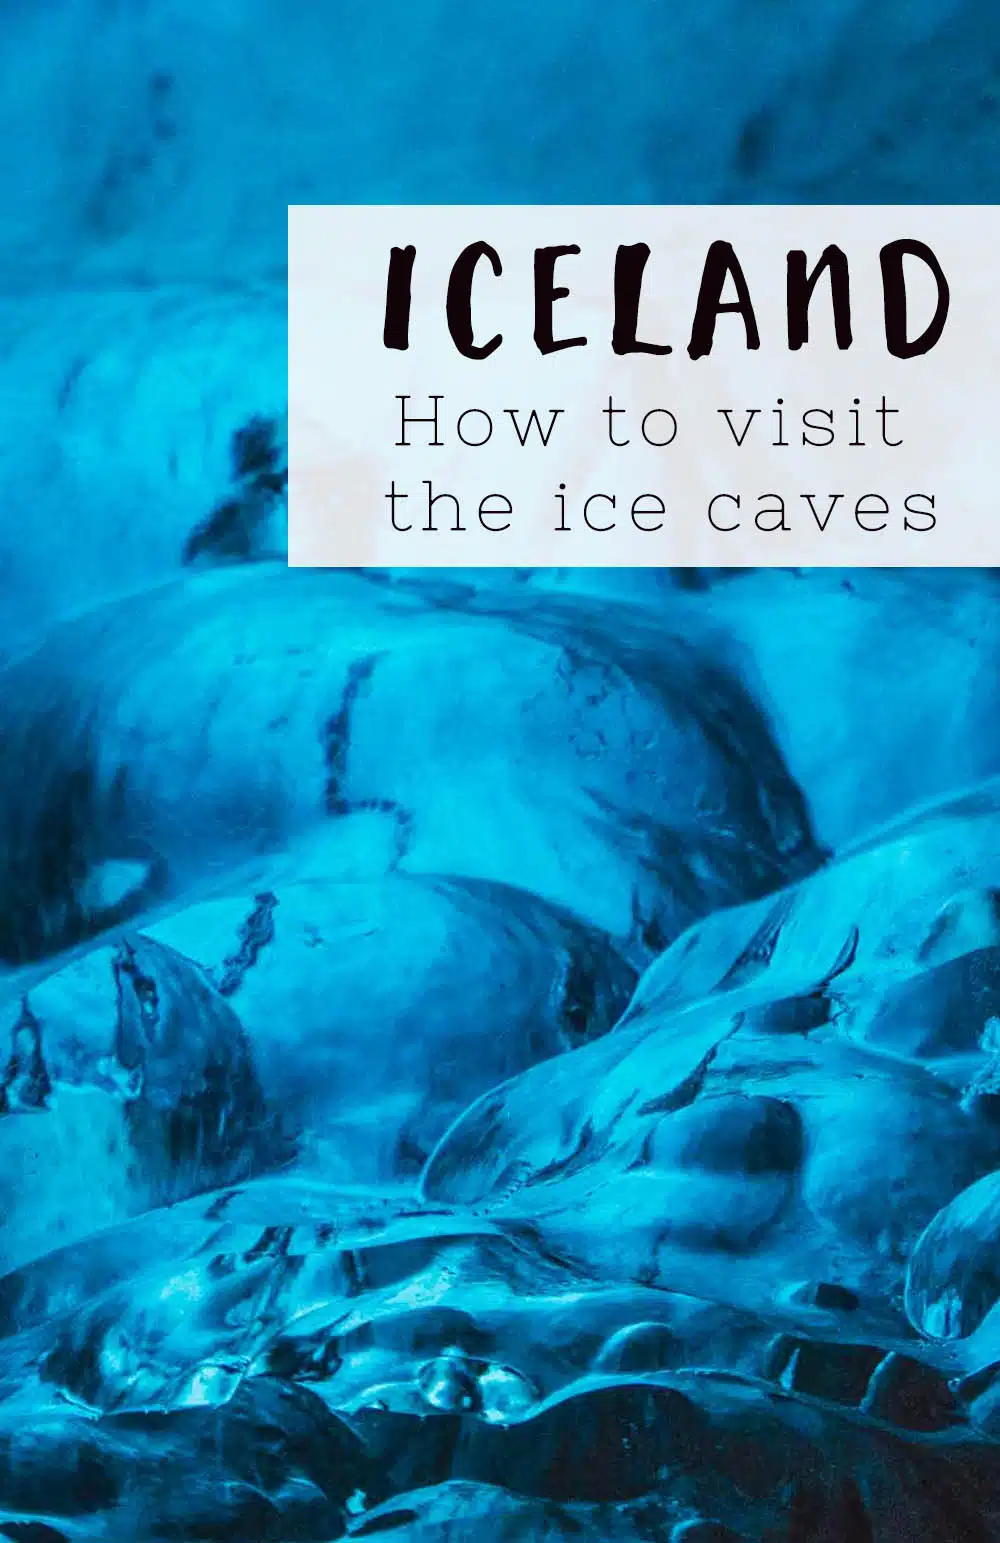 How to visit the ice caves in Iceland